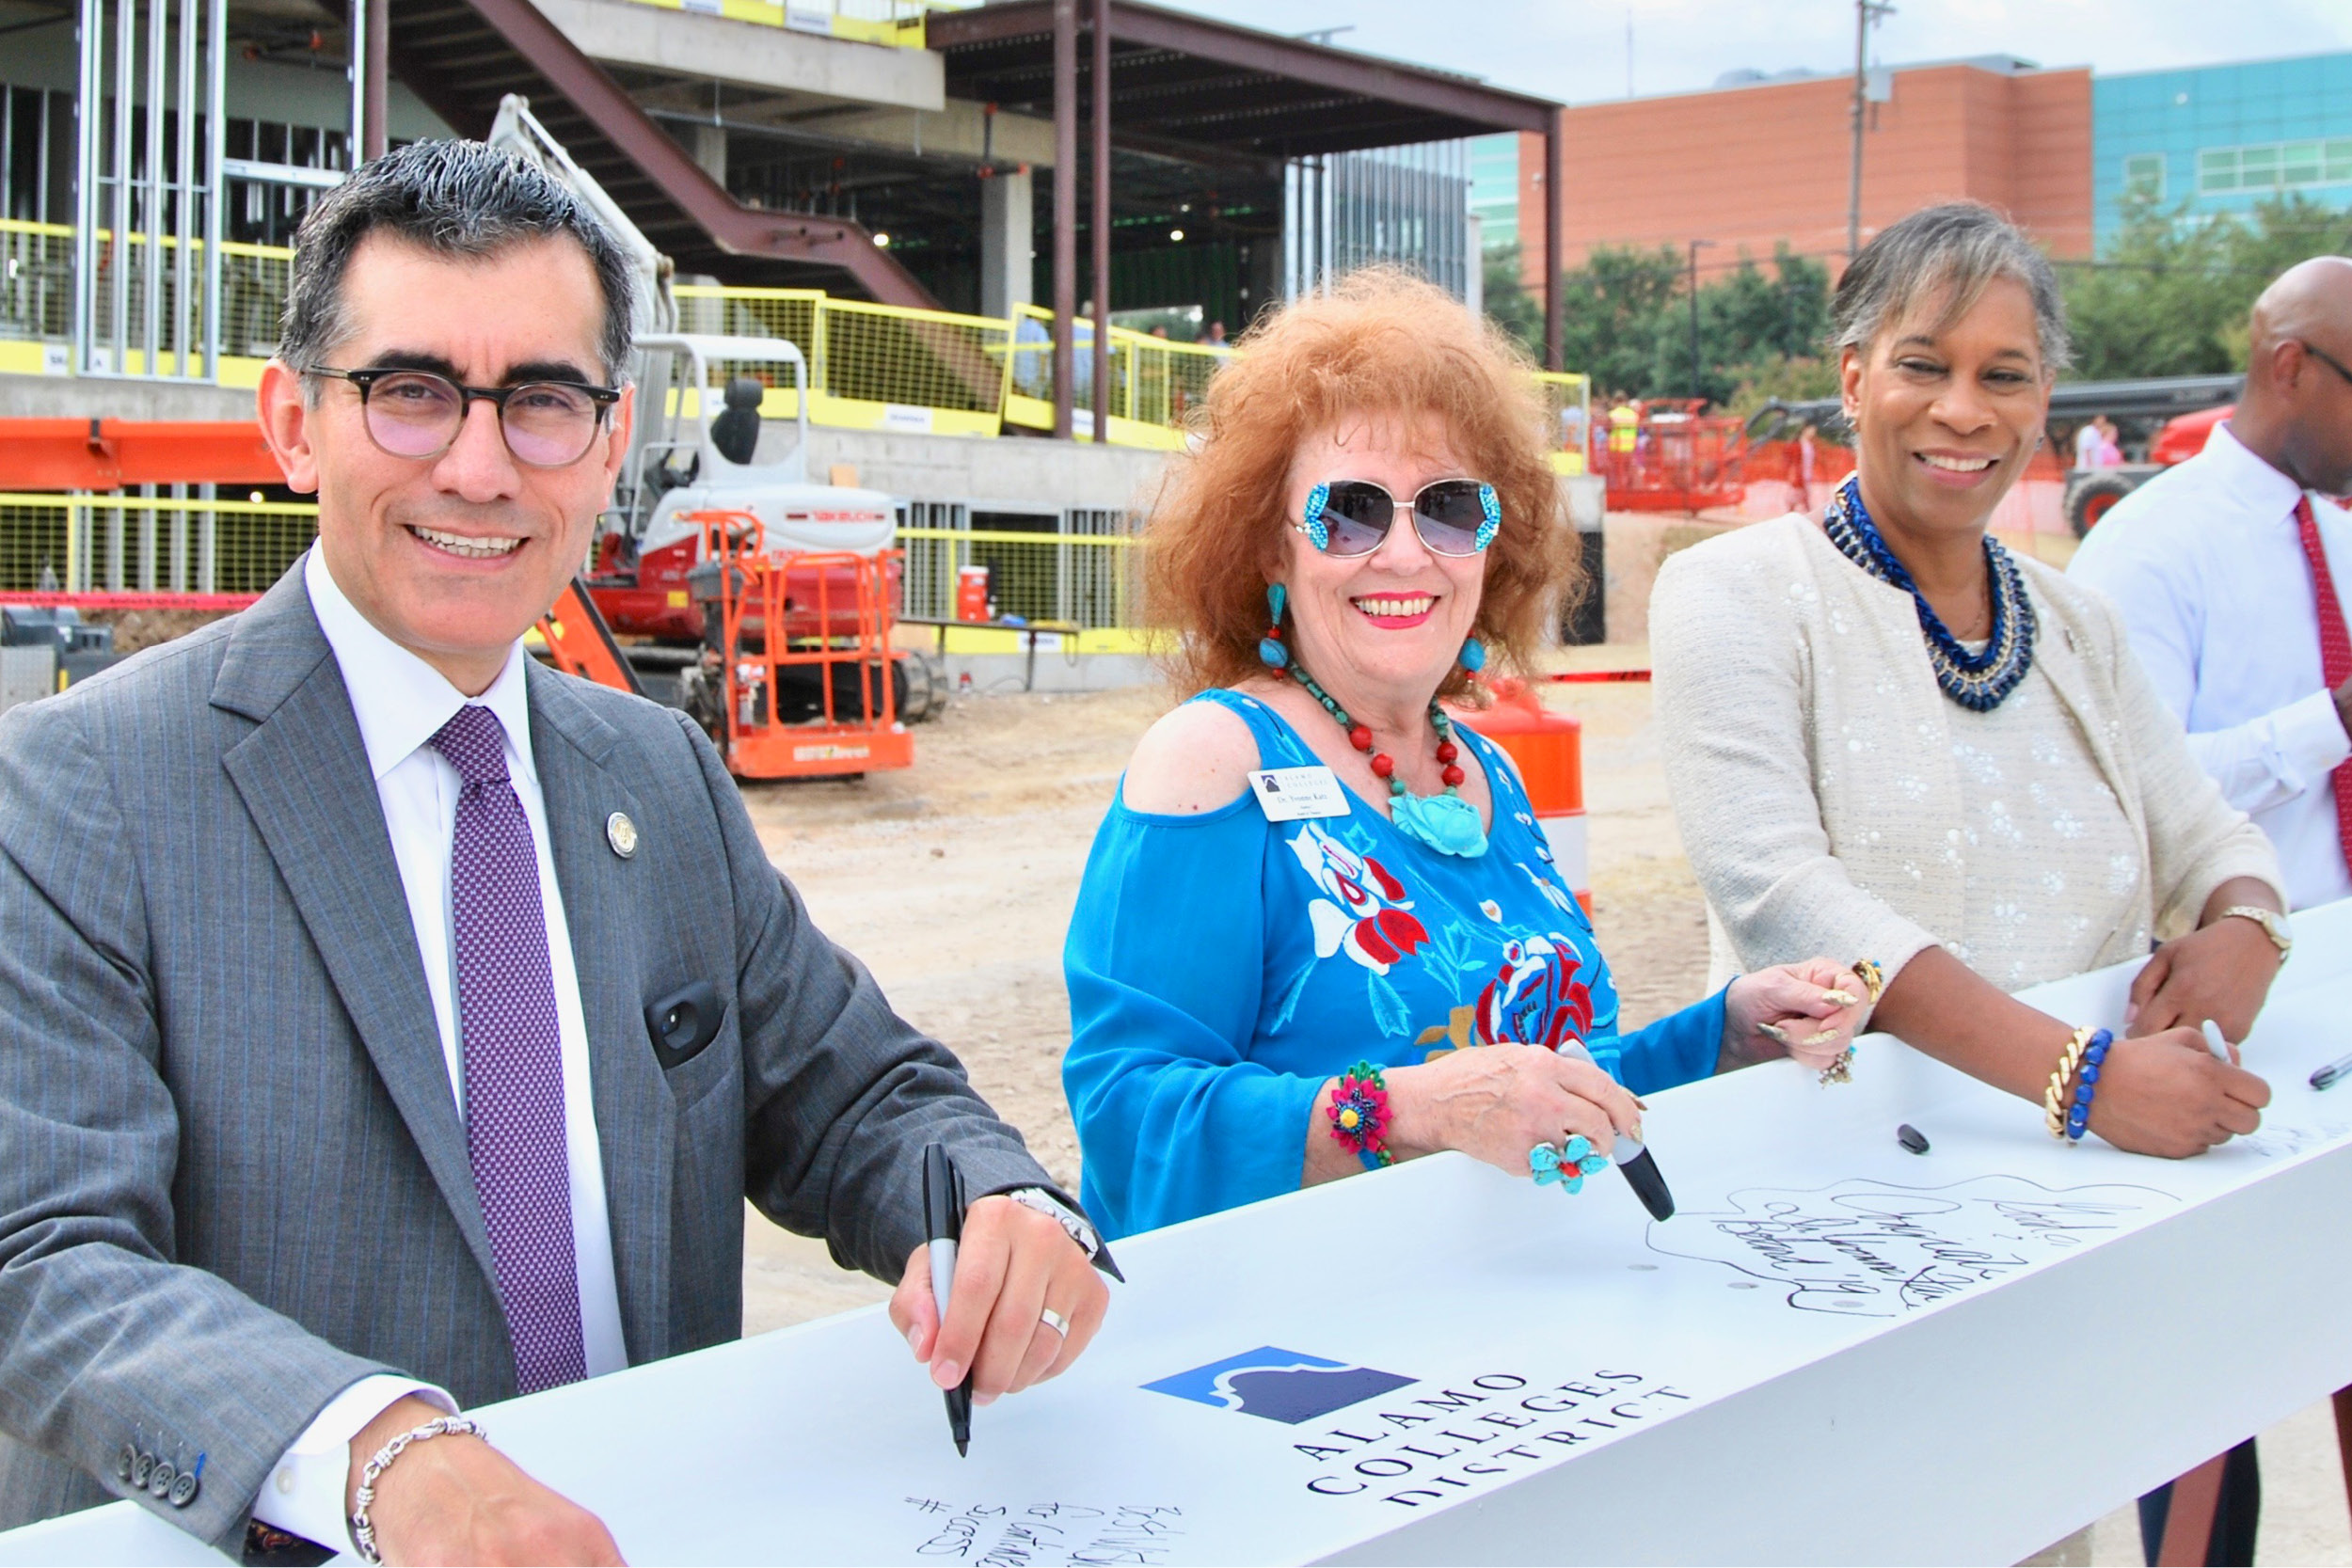 Chancellor Flores, Trustee Katz, and Dr. Loston signing a building beam outside